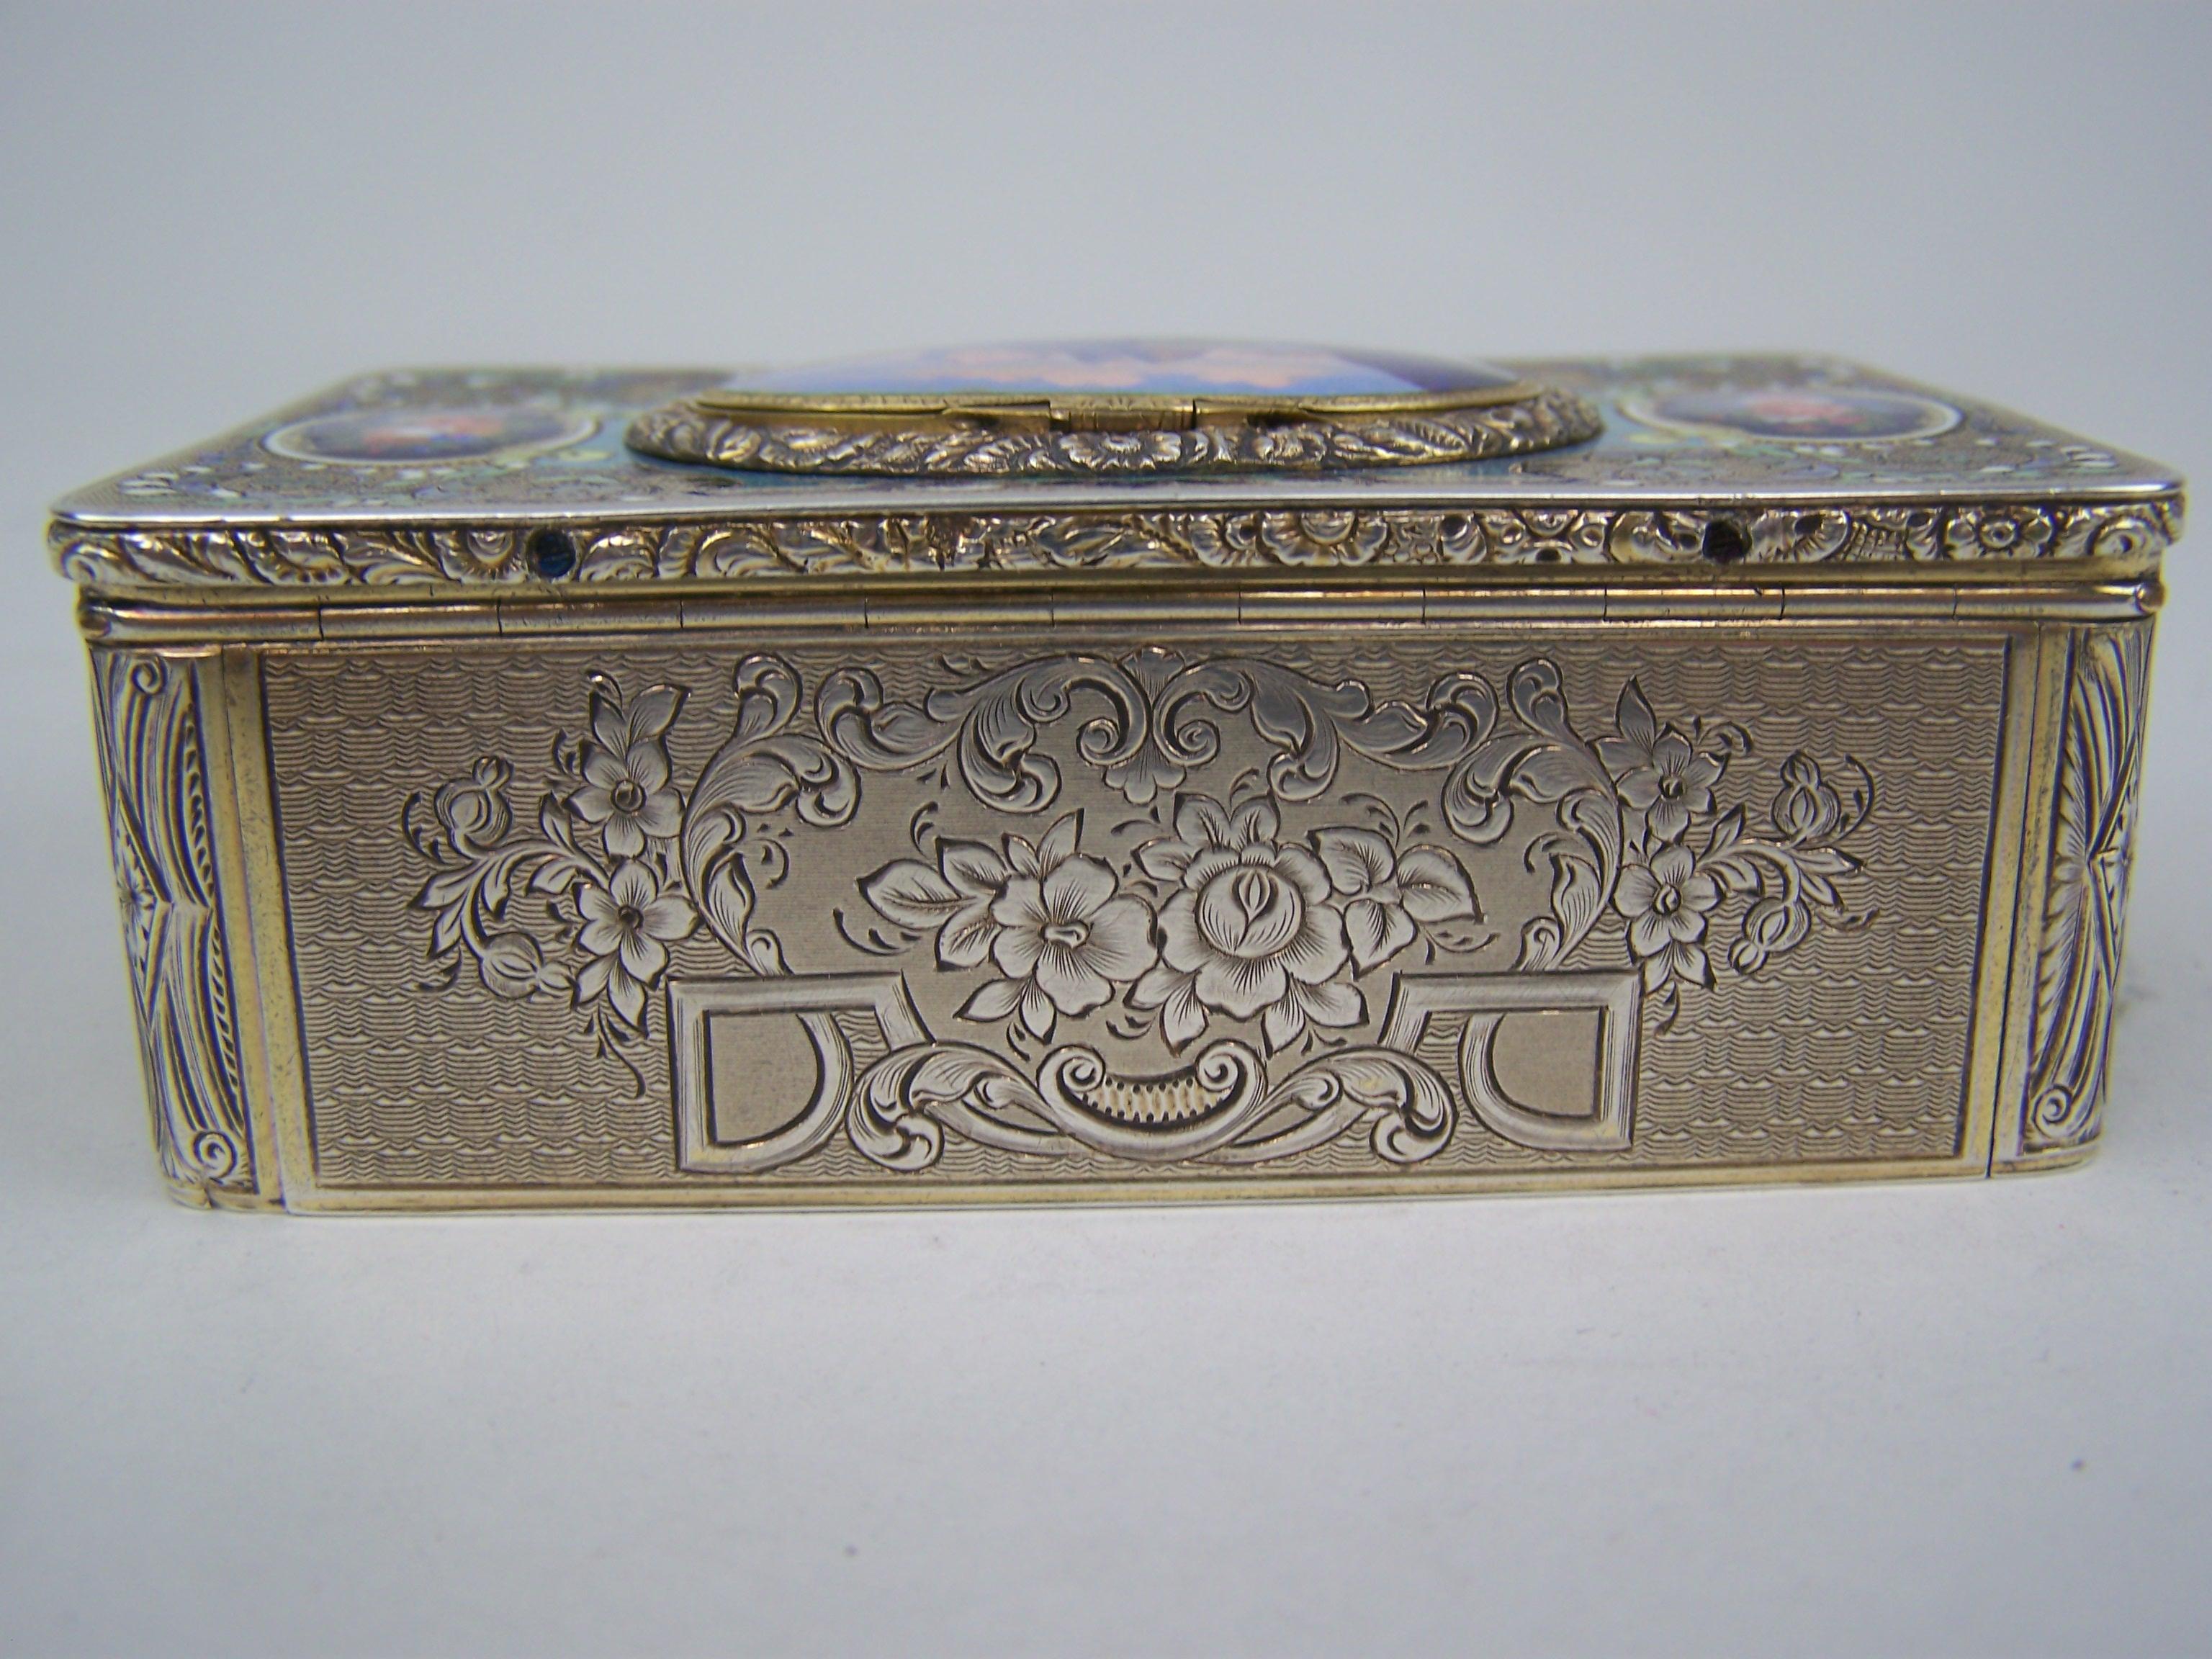 Singing bird box by Bruguier in silver case with enamel to top and lid For Sale 1